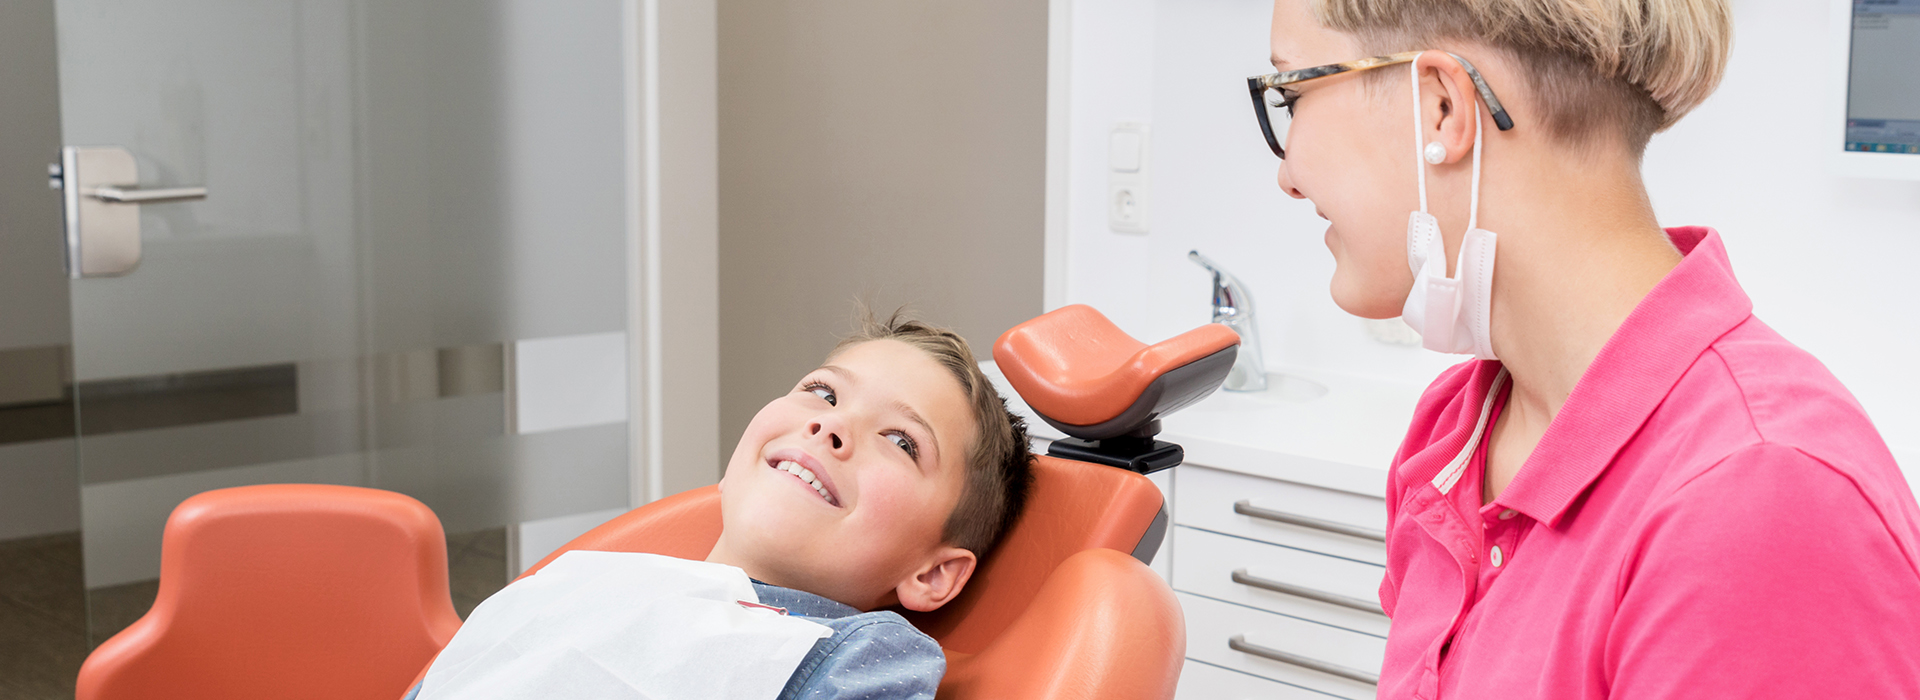 The image shows a dental office setting with a patient in the chair, a dentist standing behind them, and another person seated at a desk.